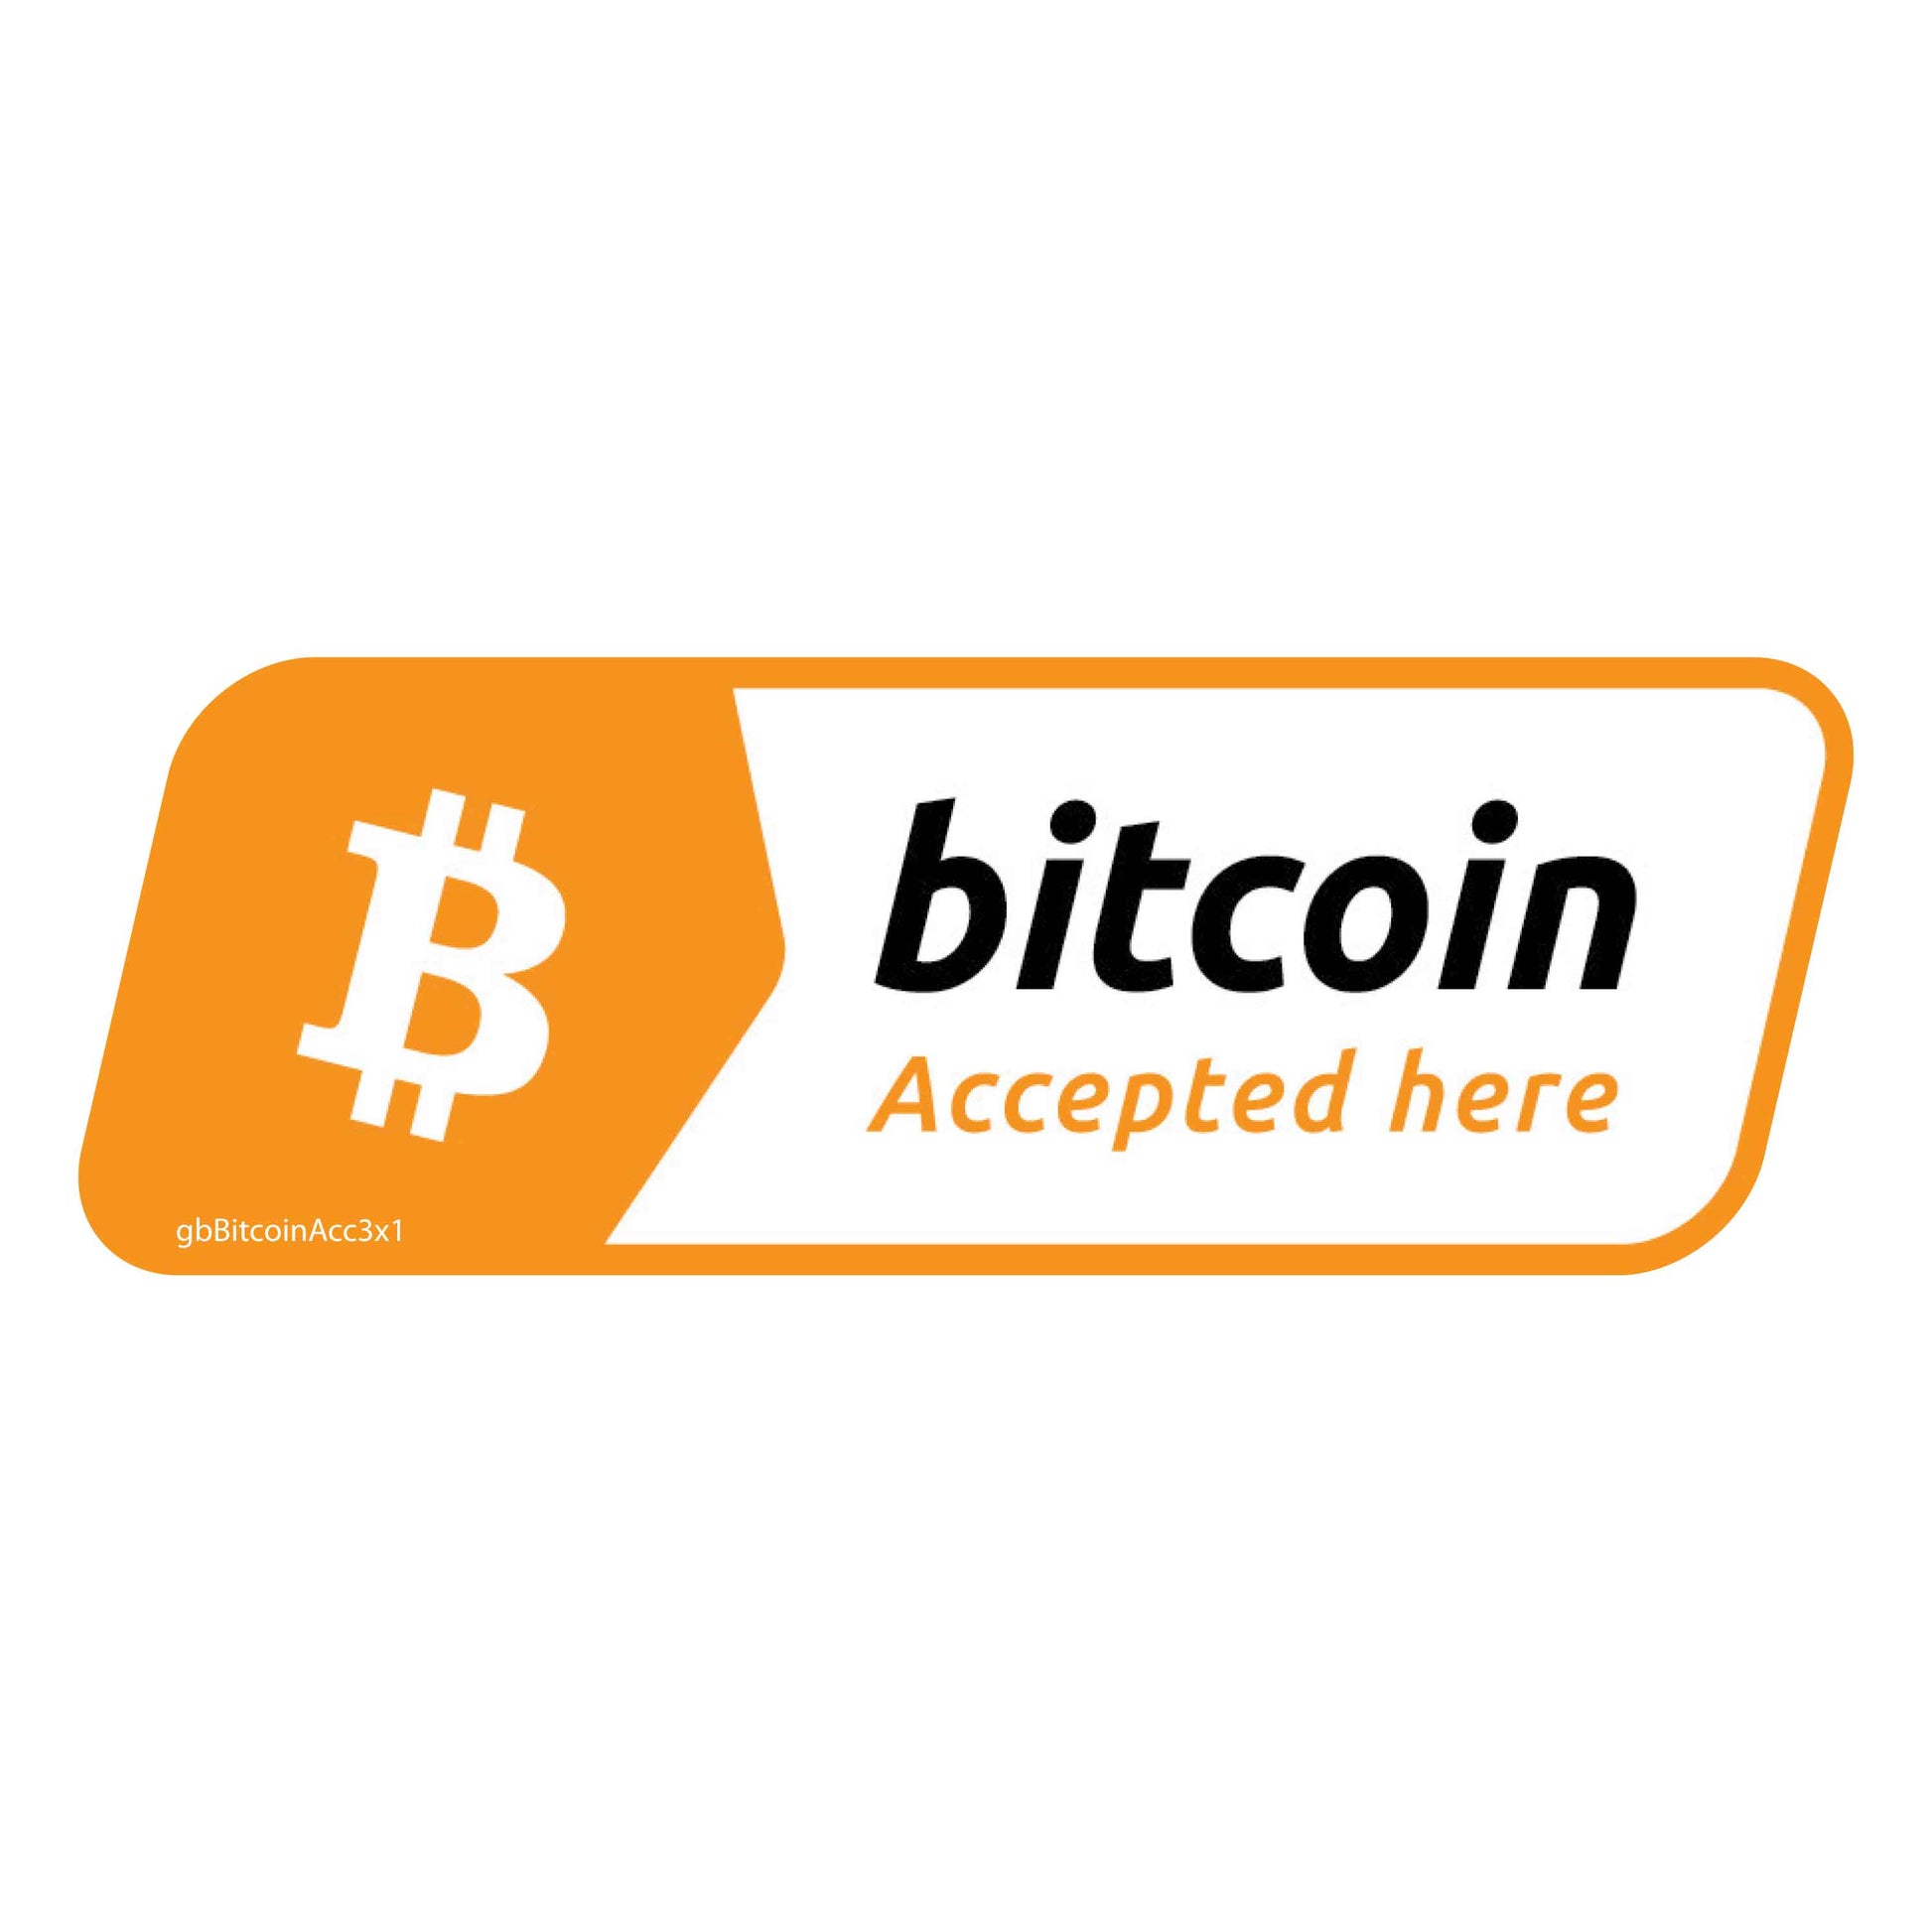 Bitcoin Accepted Here Decal. 3 inches by 1 inch in size. 